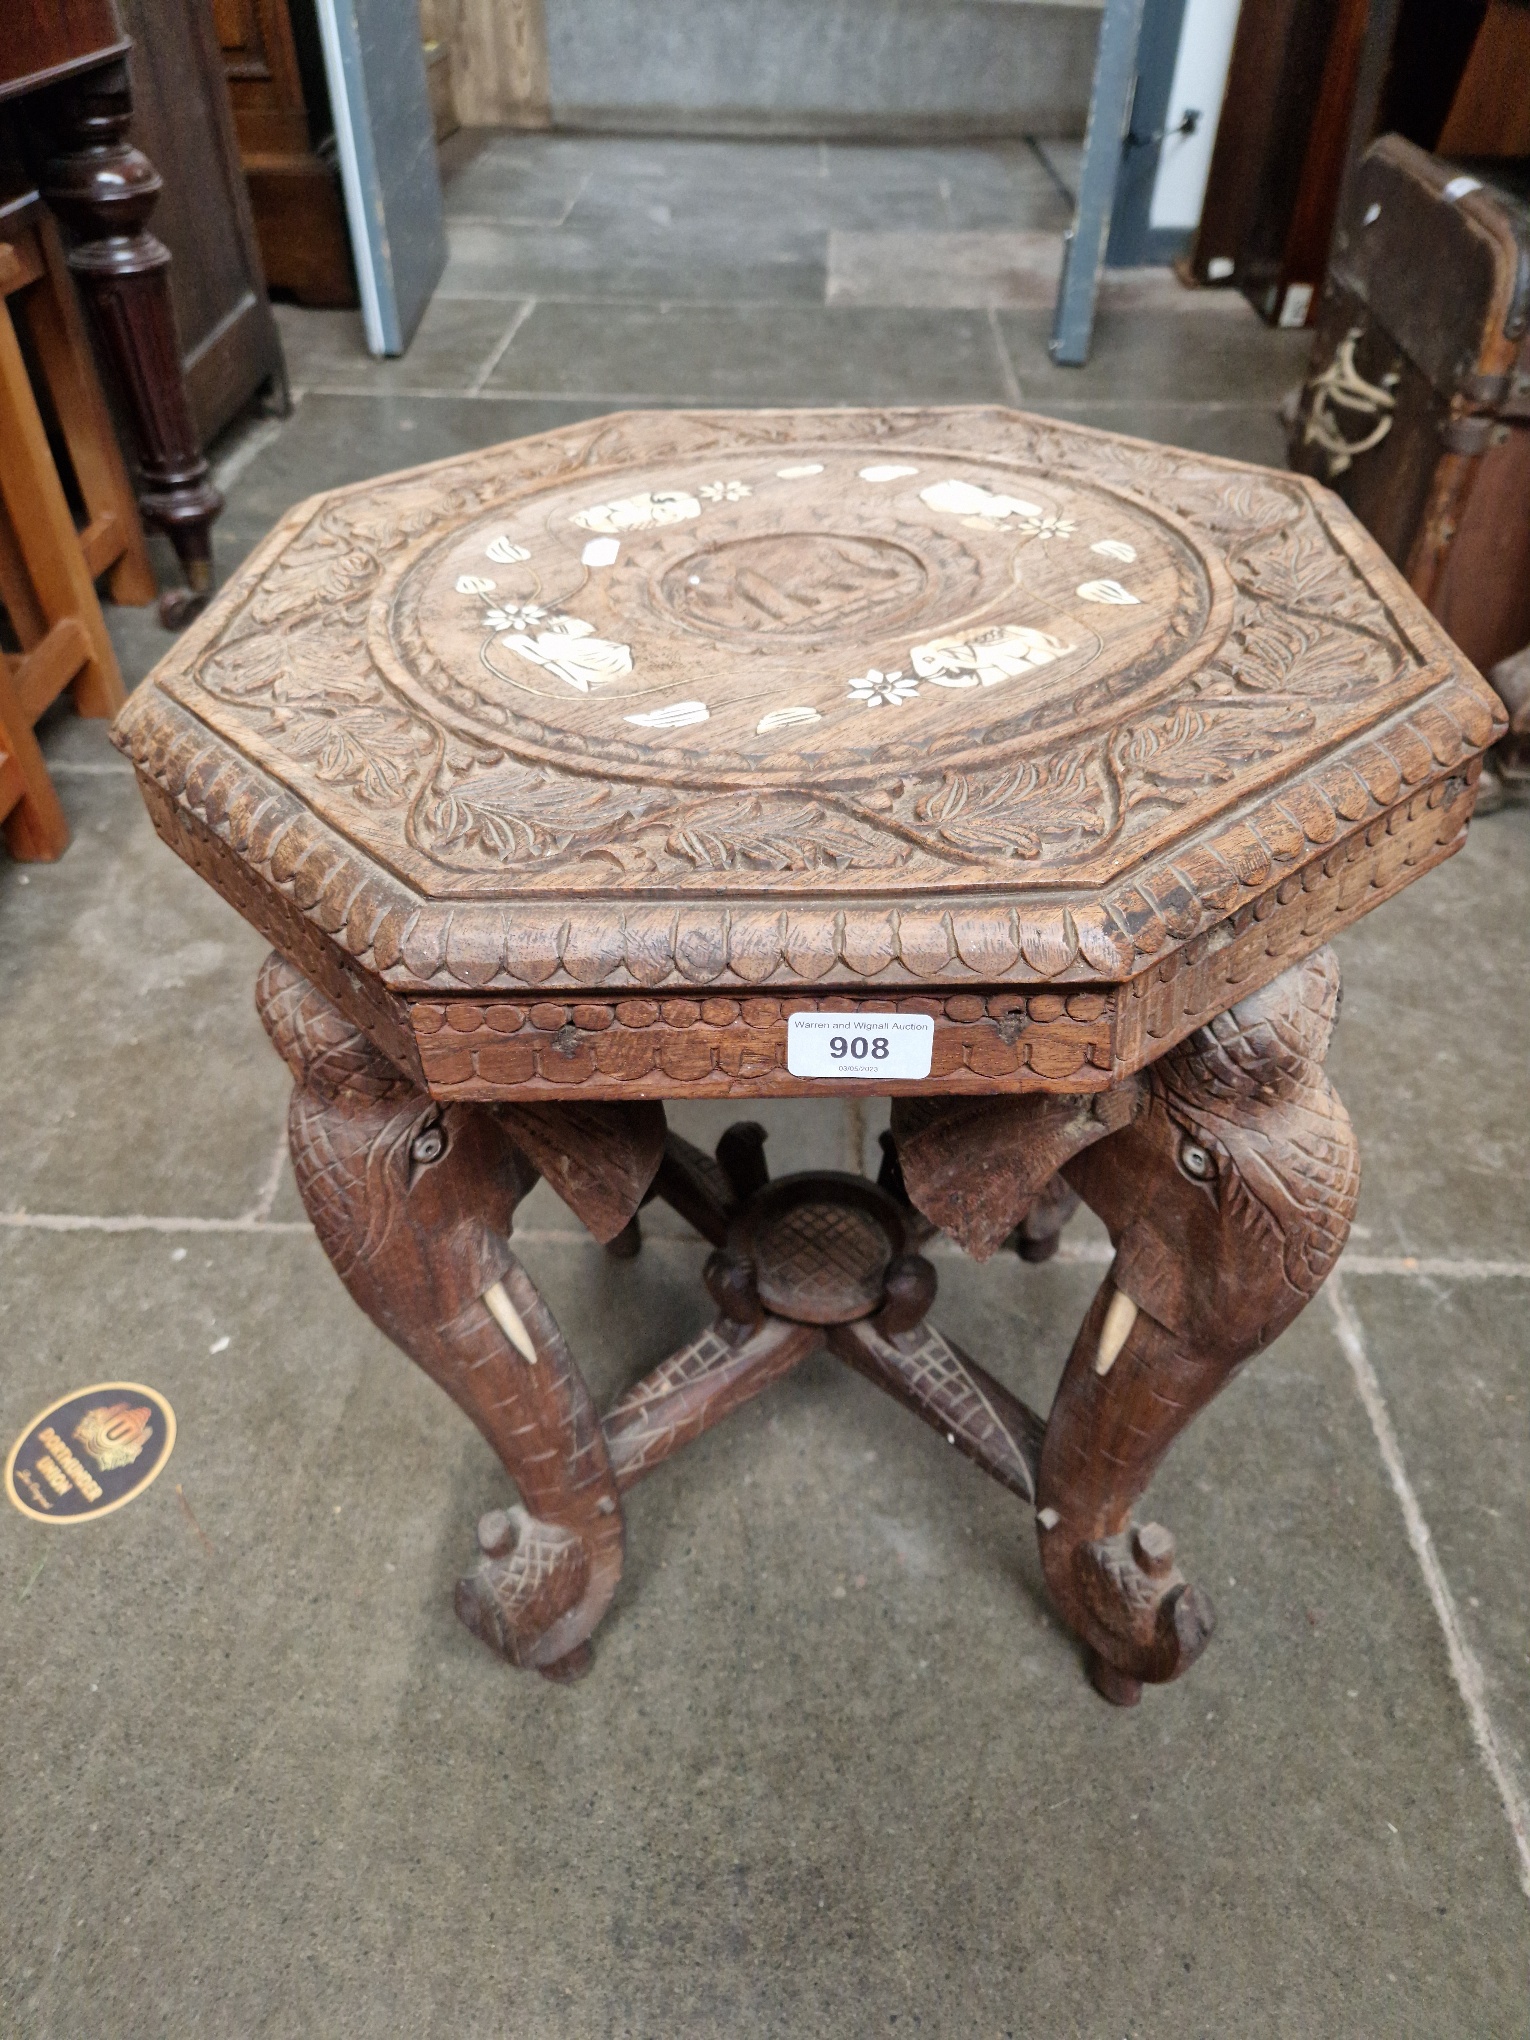 A carved wood elephant table, inlaid to top, circa 1900.